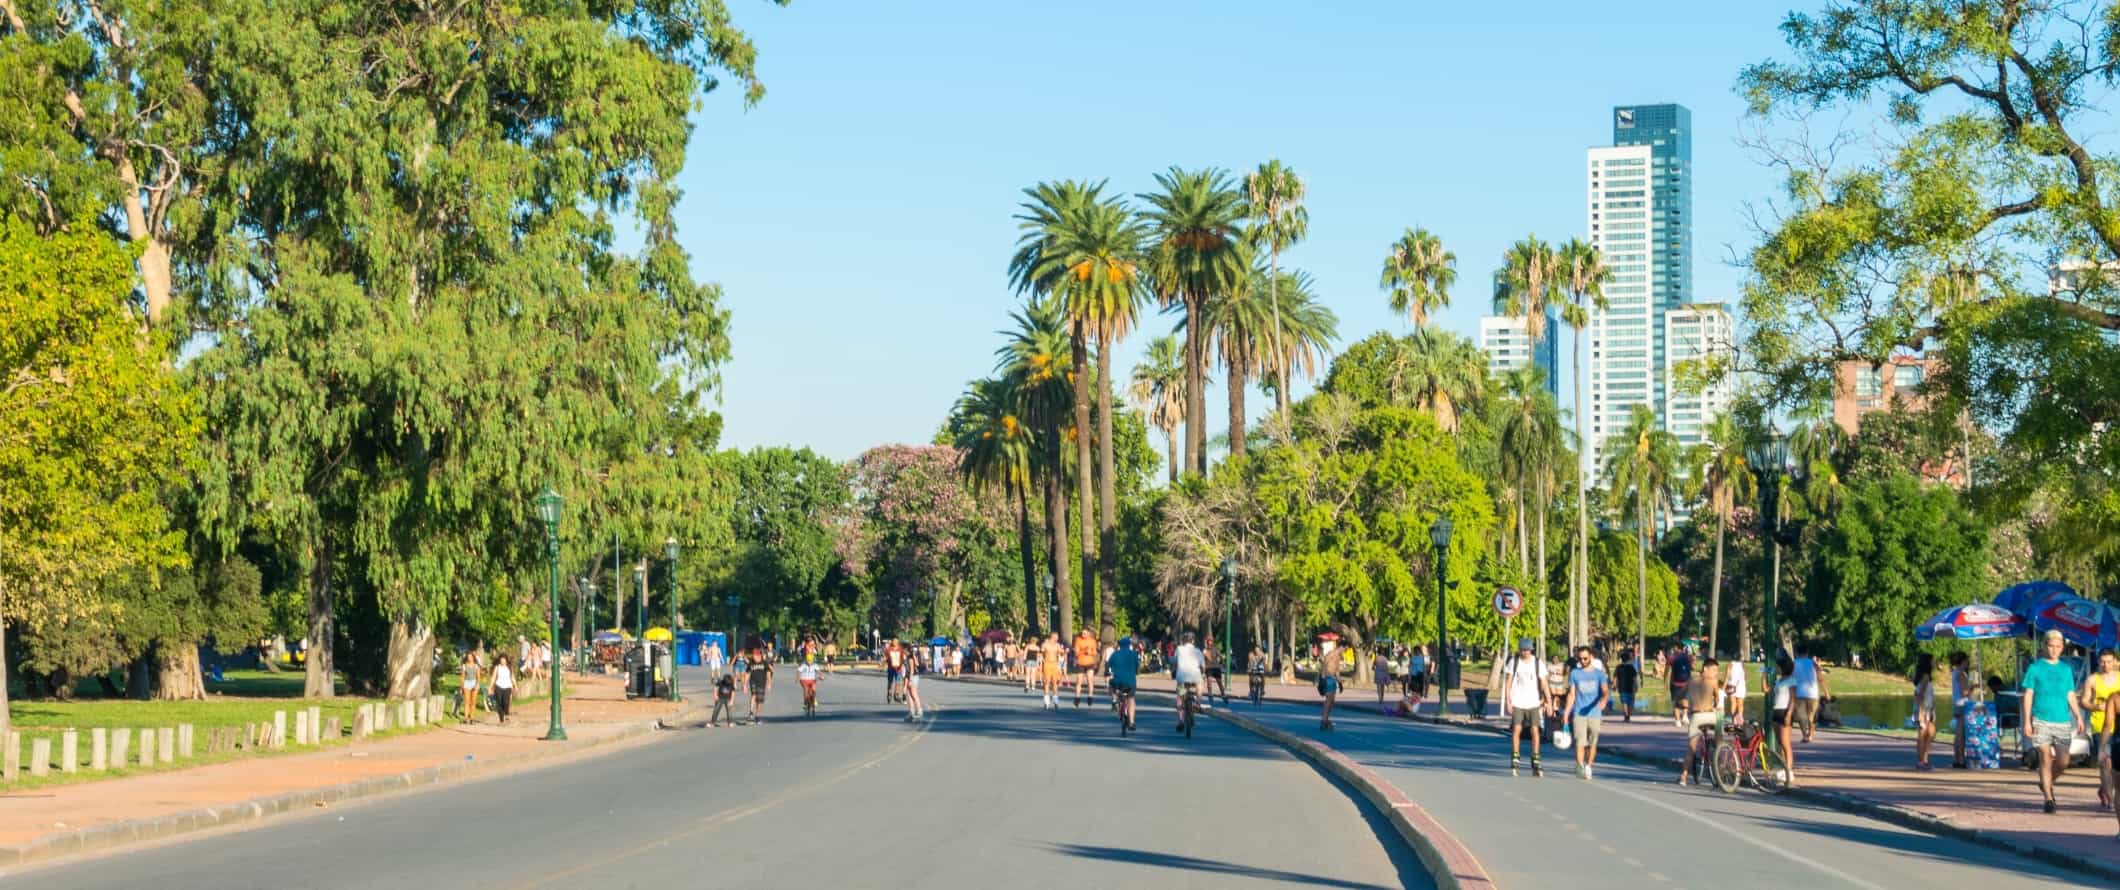 People walking and roller blading through a park filled with palm trees in Buenos Aires, Argentina